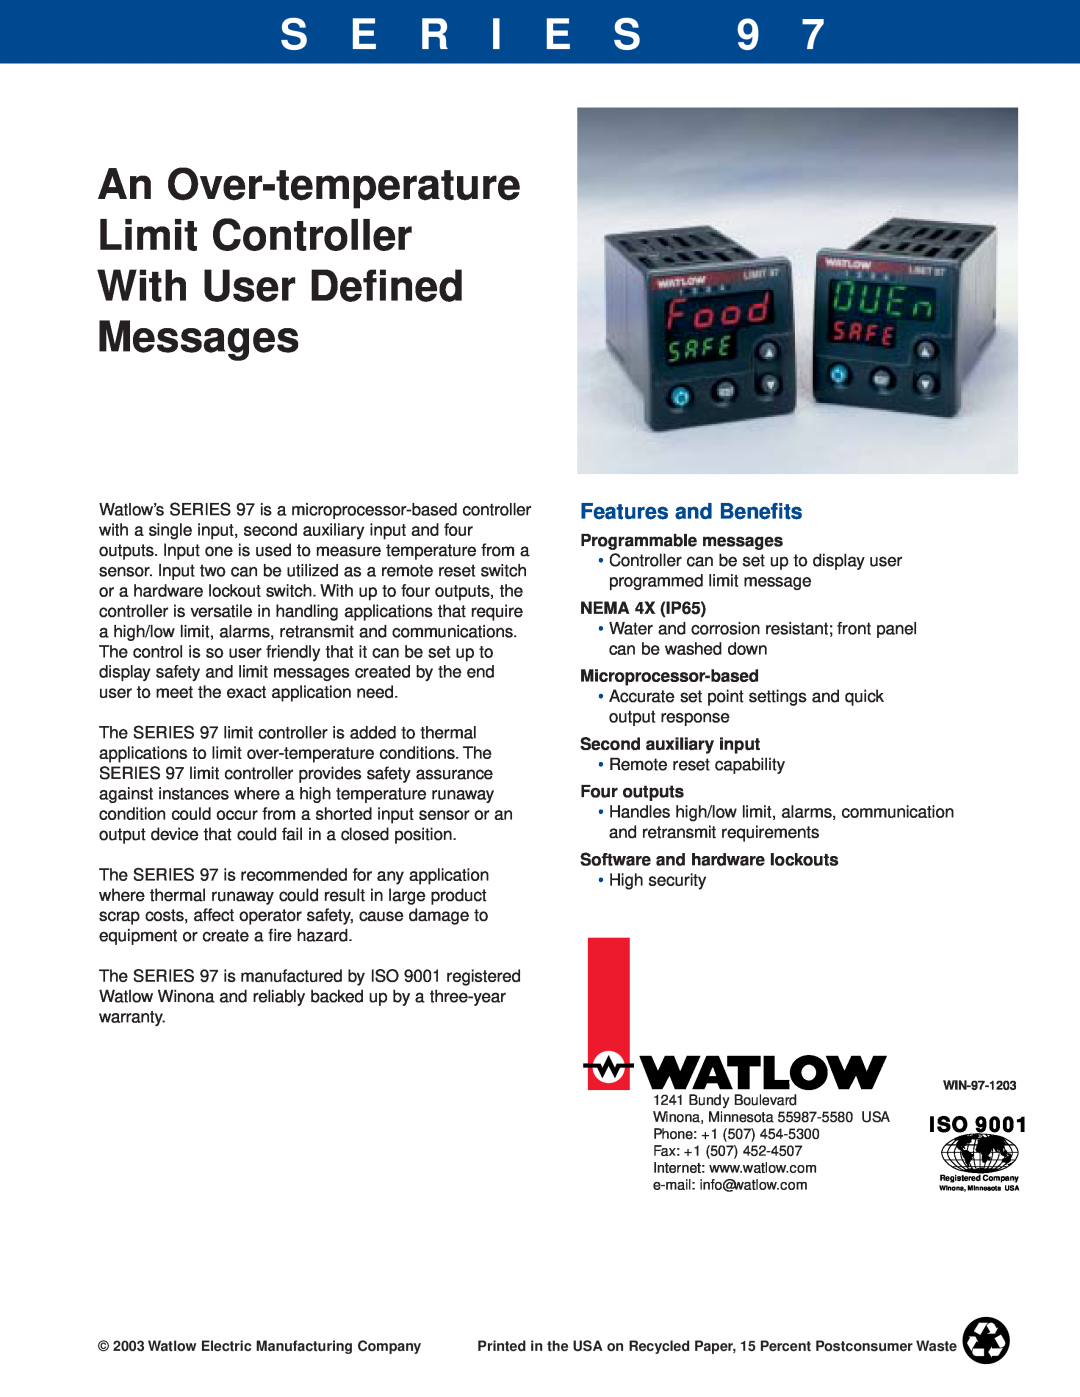 Watlow Electric Series 97 warranty Features and Beneﬁts, Programmable messages, NEMA 4X IP65, Microprocessor-based 